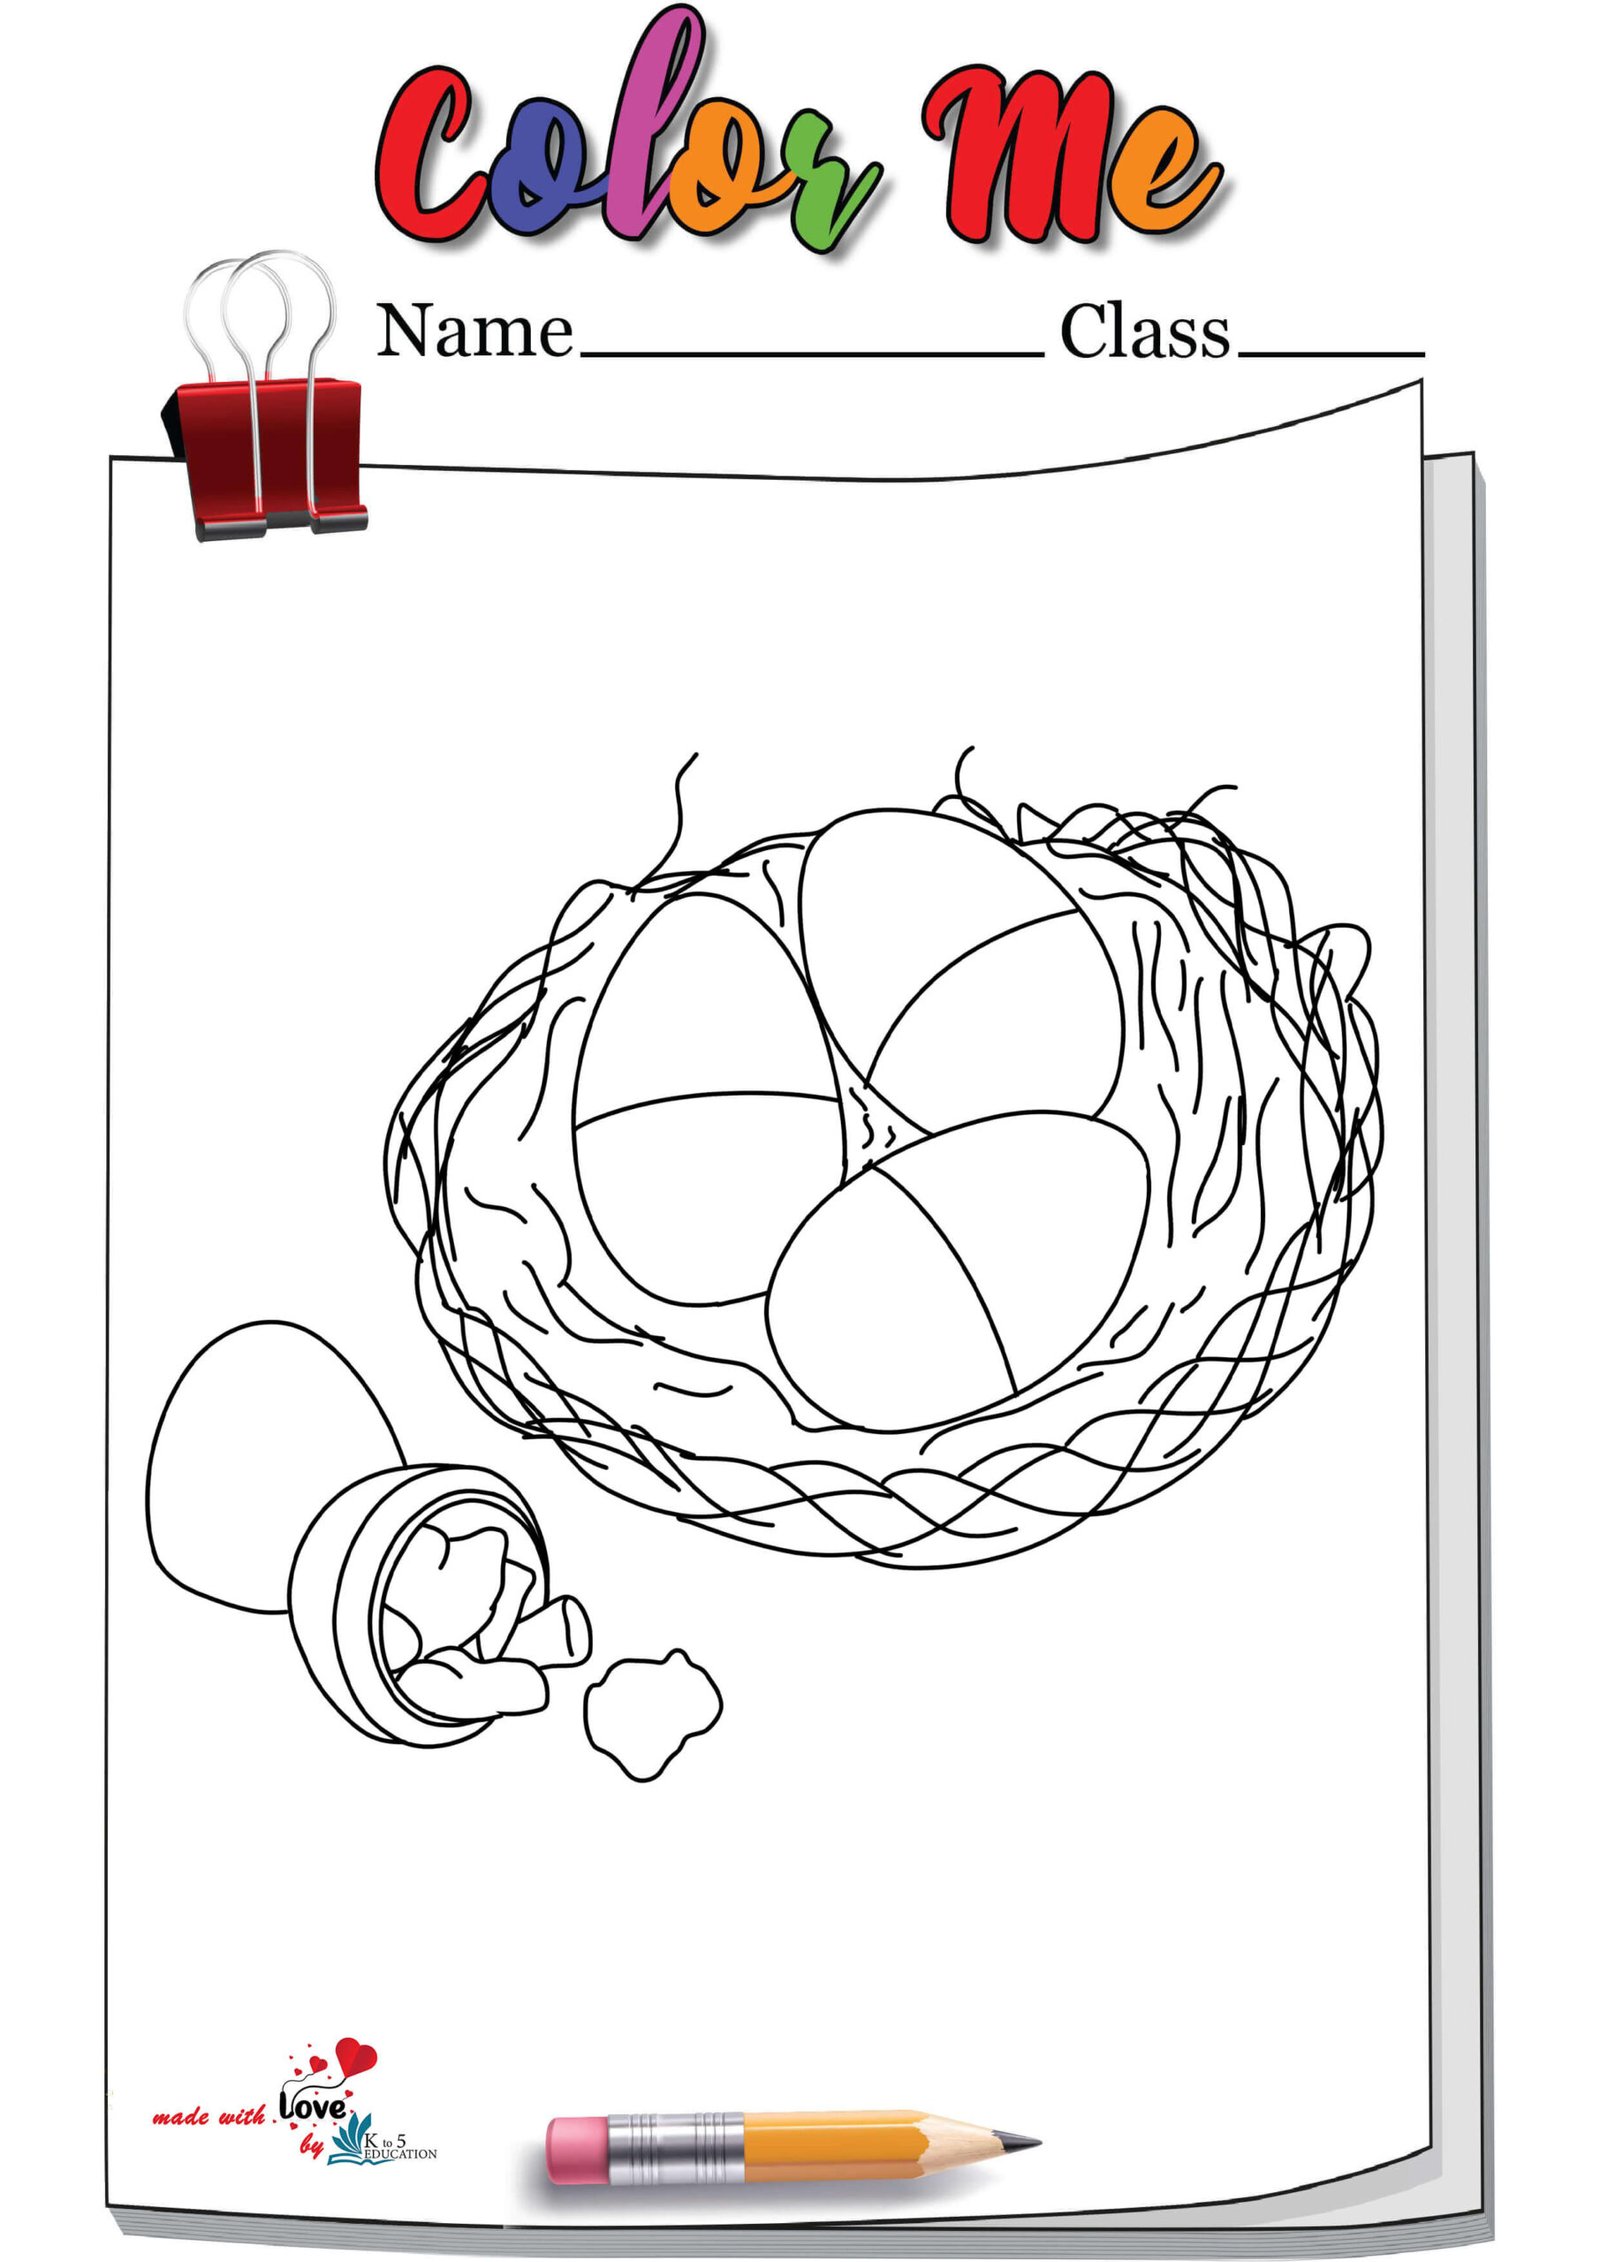 Creative Indoor Easter Egg Hunt Coloring Page